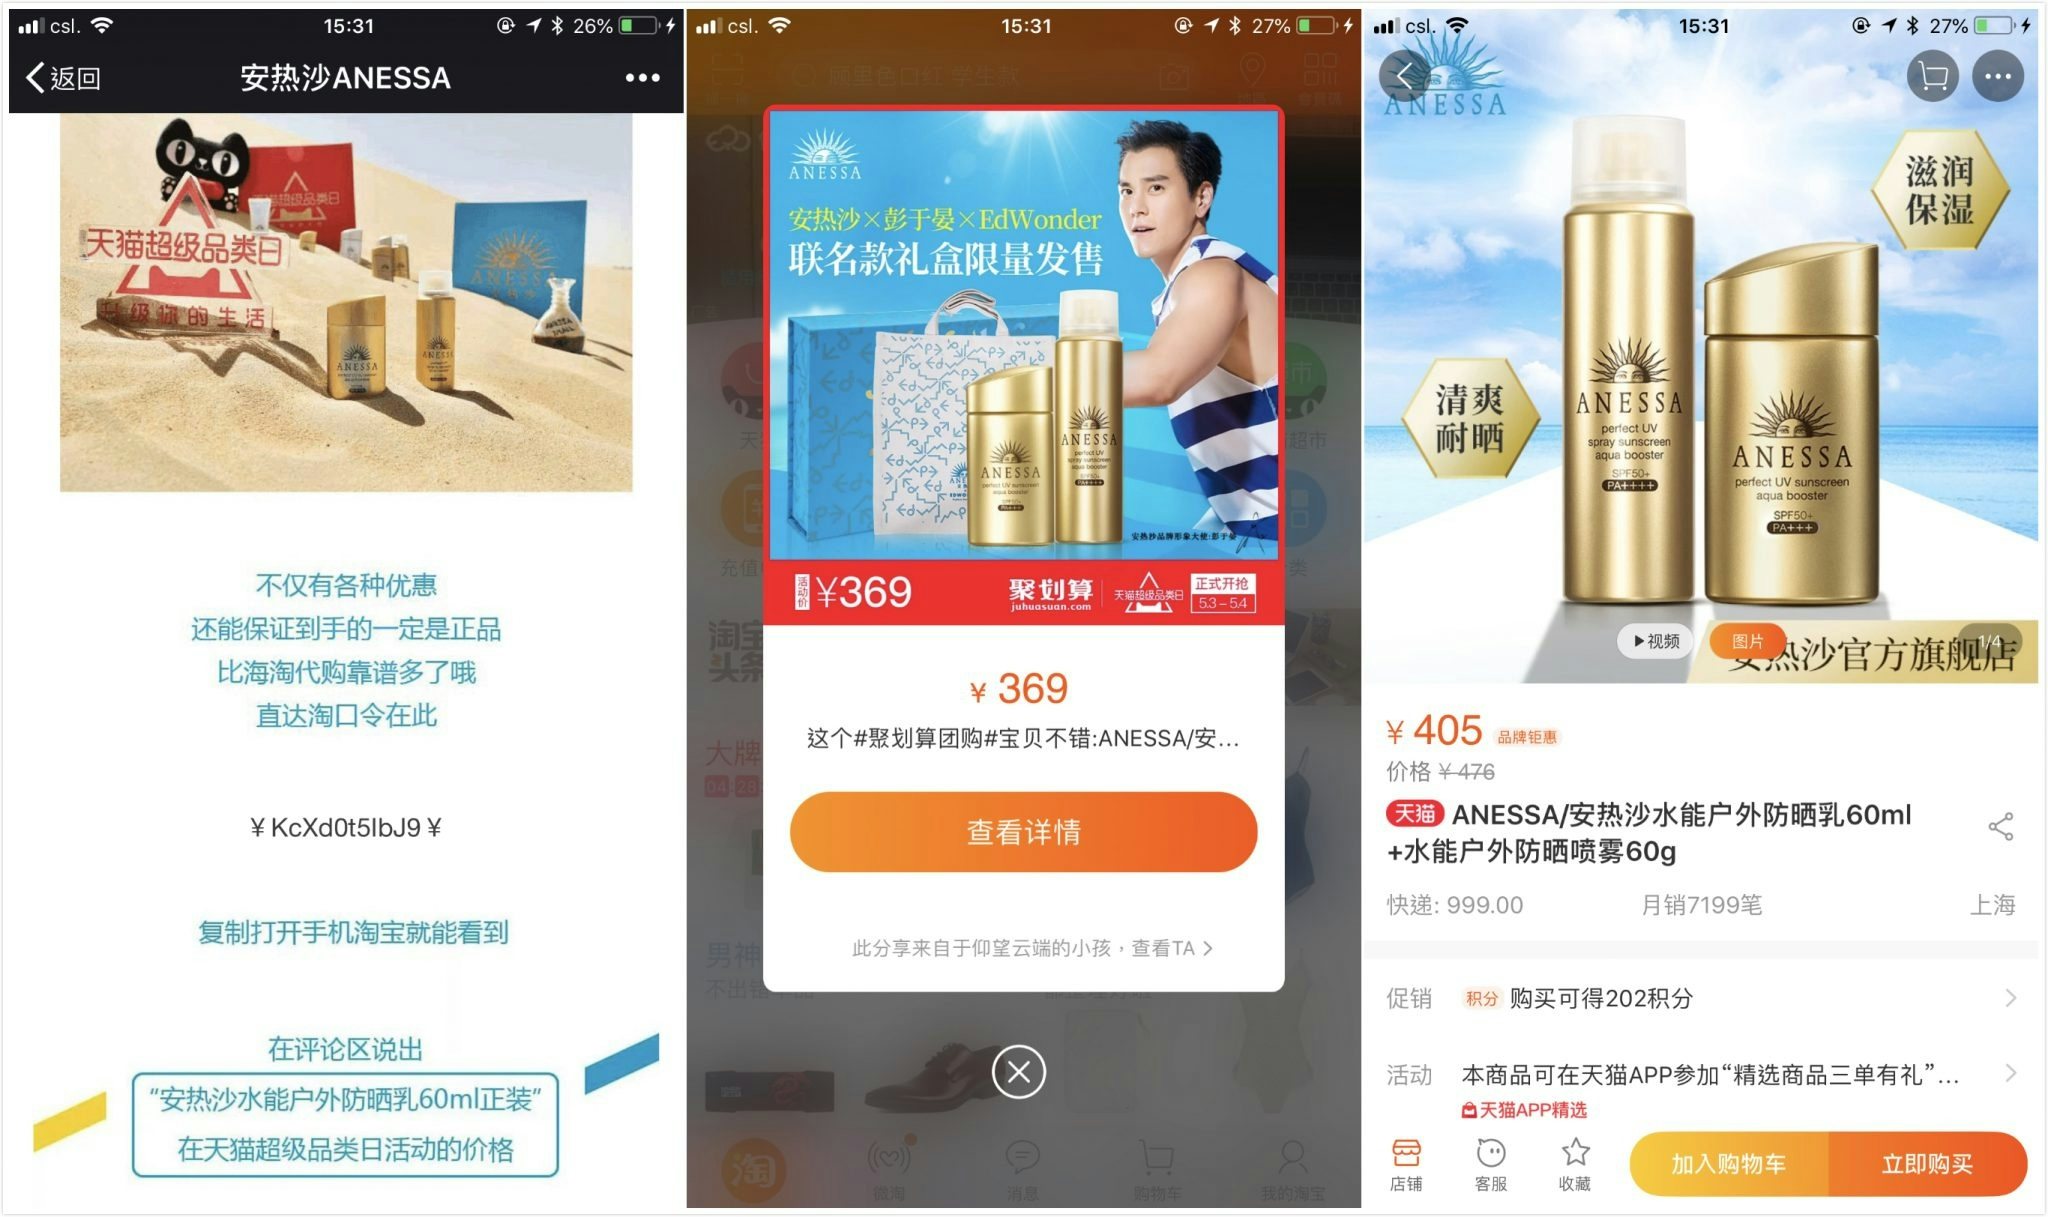 A Taobao/Tmall passphrase allows WeChat users to go to designated pages on Taobao or Tmall. Photo: Screenshot of Taobao